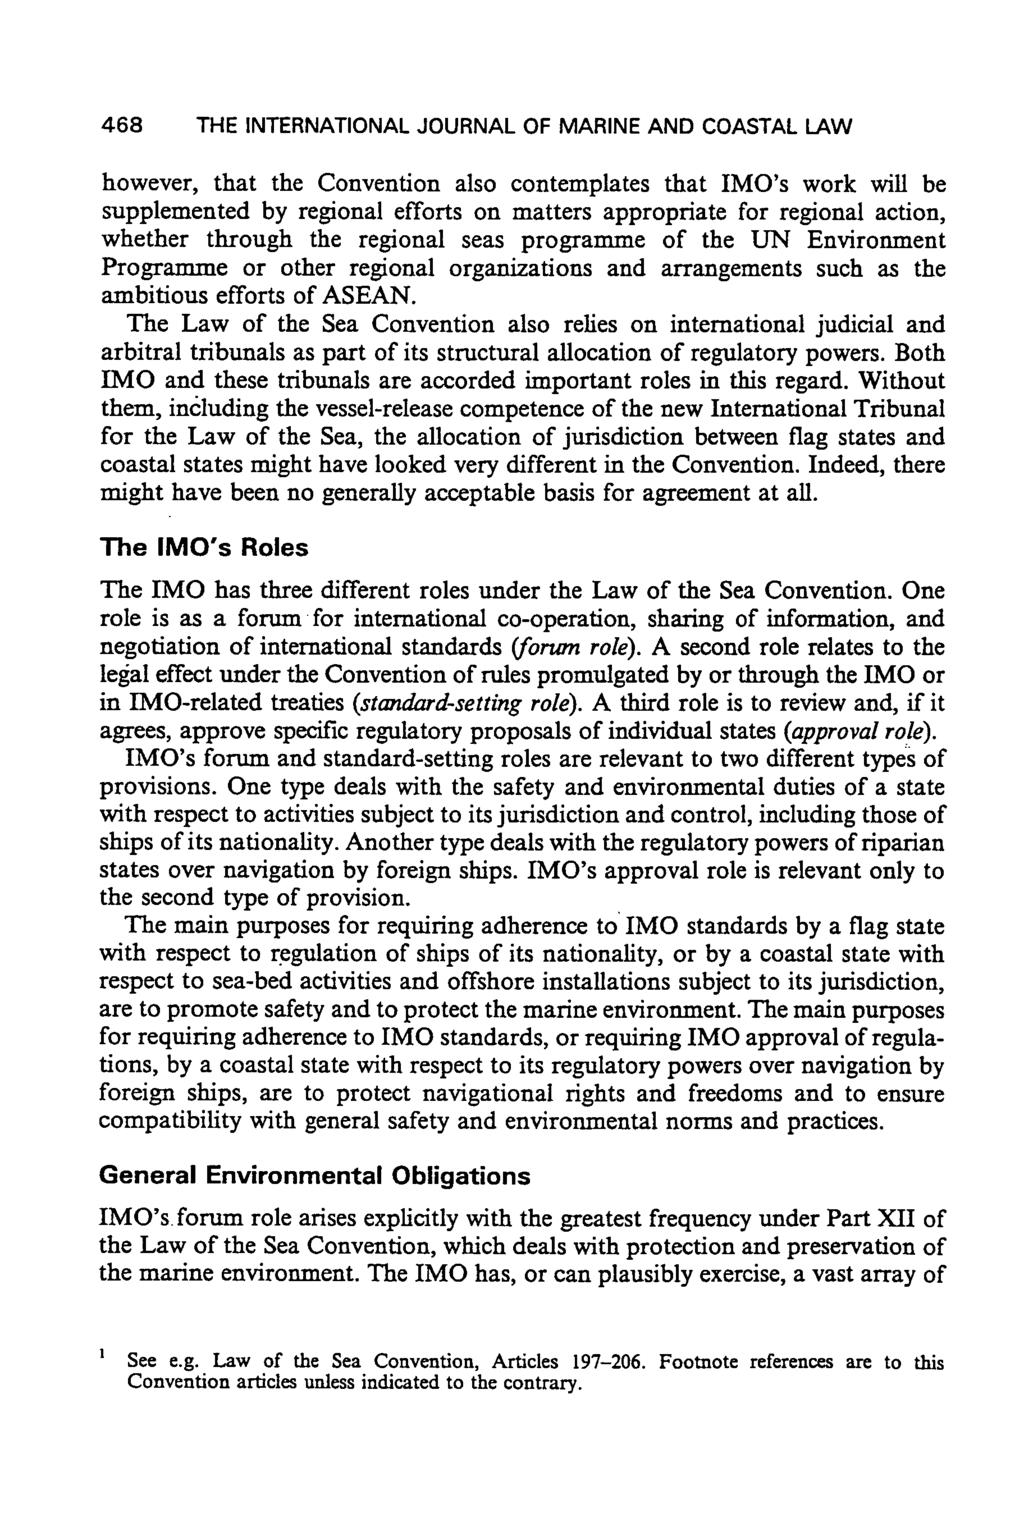 468 THE INTERNATIONAL JOURNAL OF MARINE AND COASTAL LAW however, that the Convention also contemplates that IMO's work will be supplemented by regional efforts on matters appropriate for regional